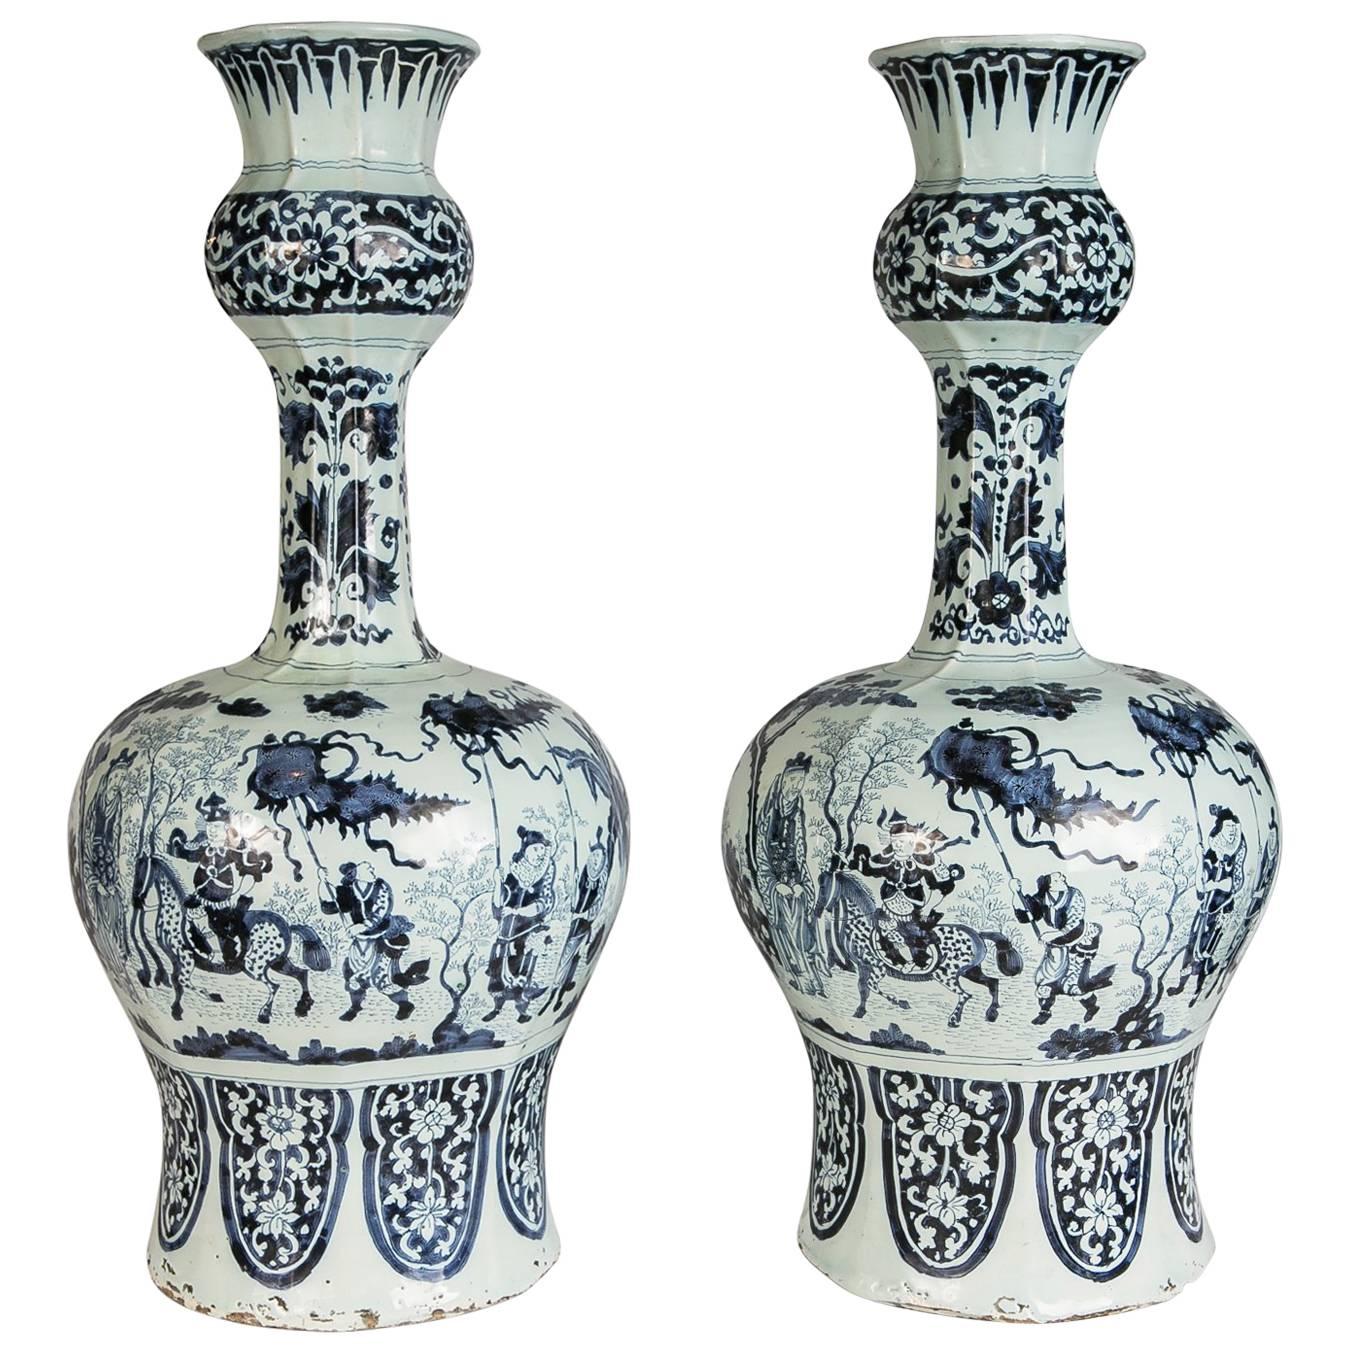 Large Pair Antique Delft Blue and White Vases Made circa 1700-1720